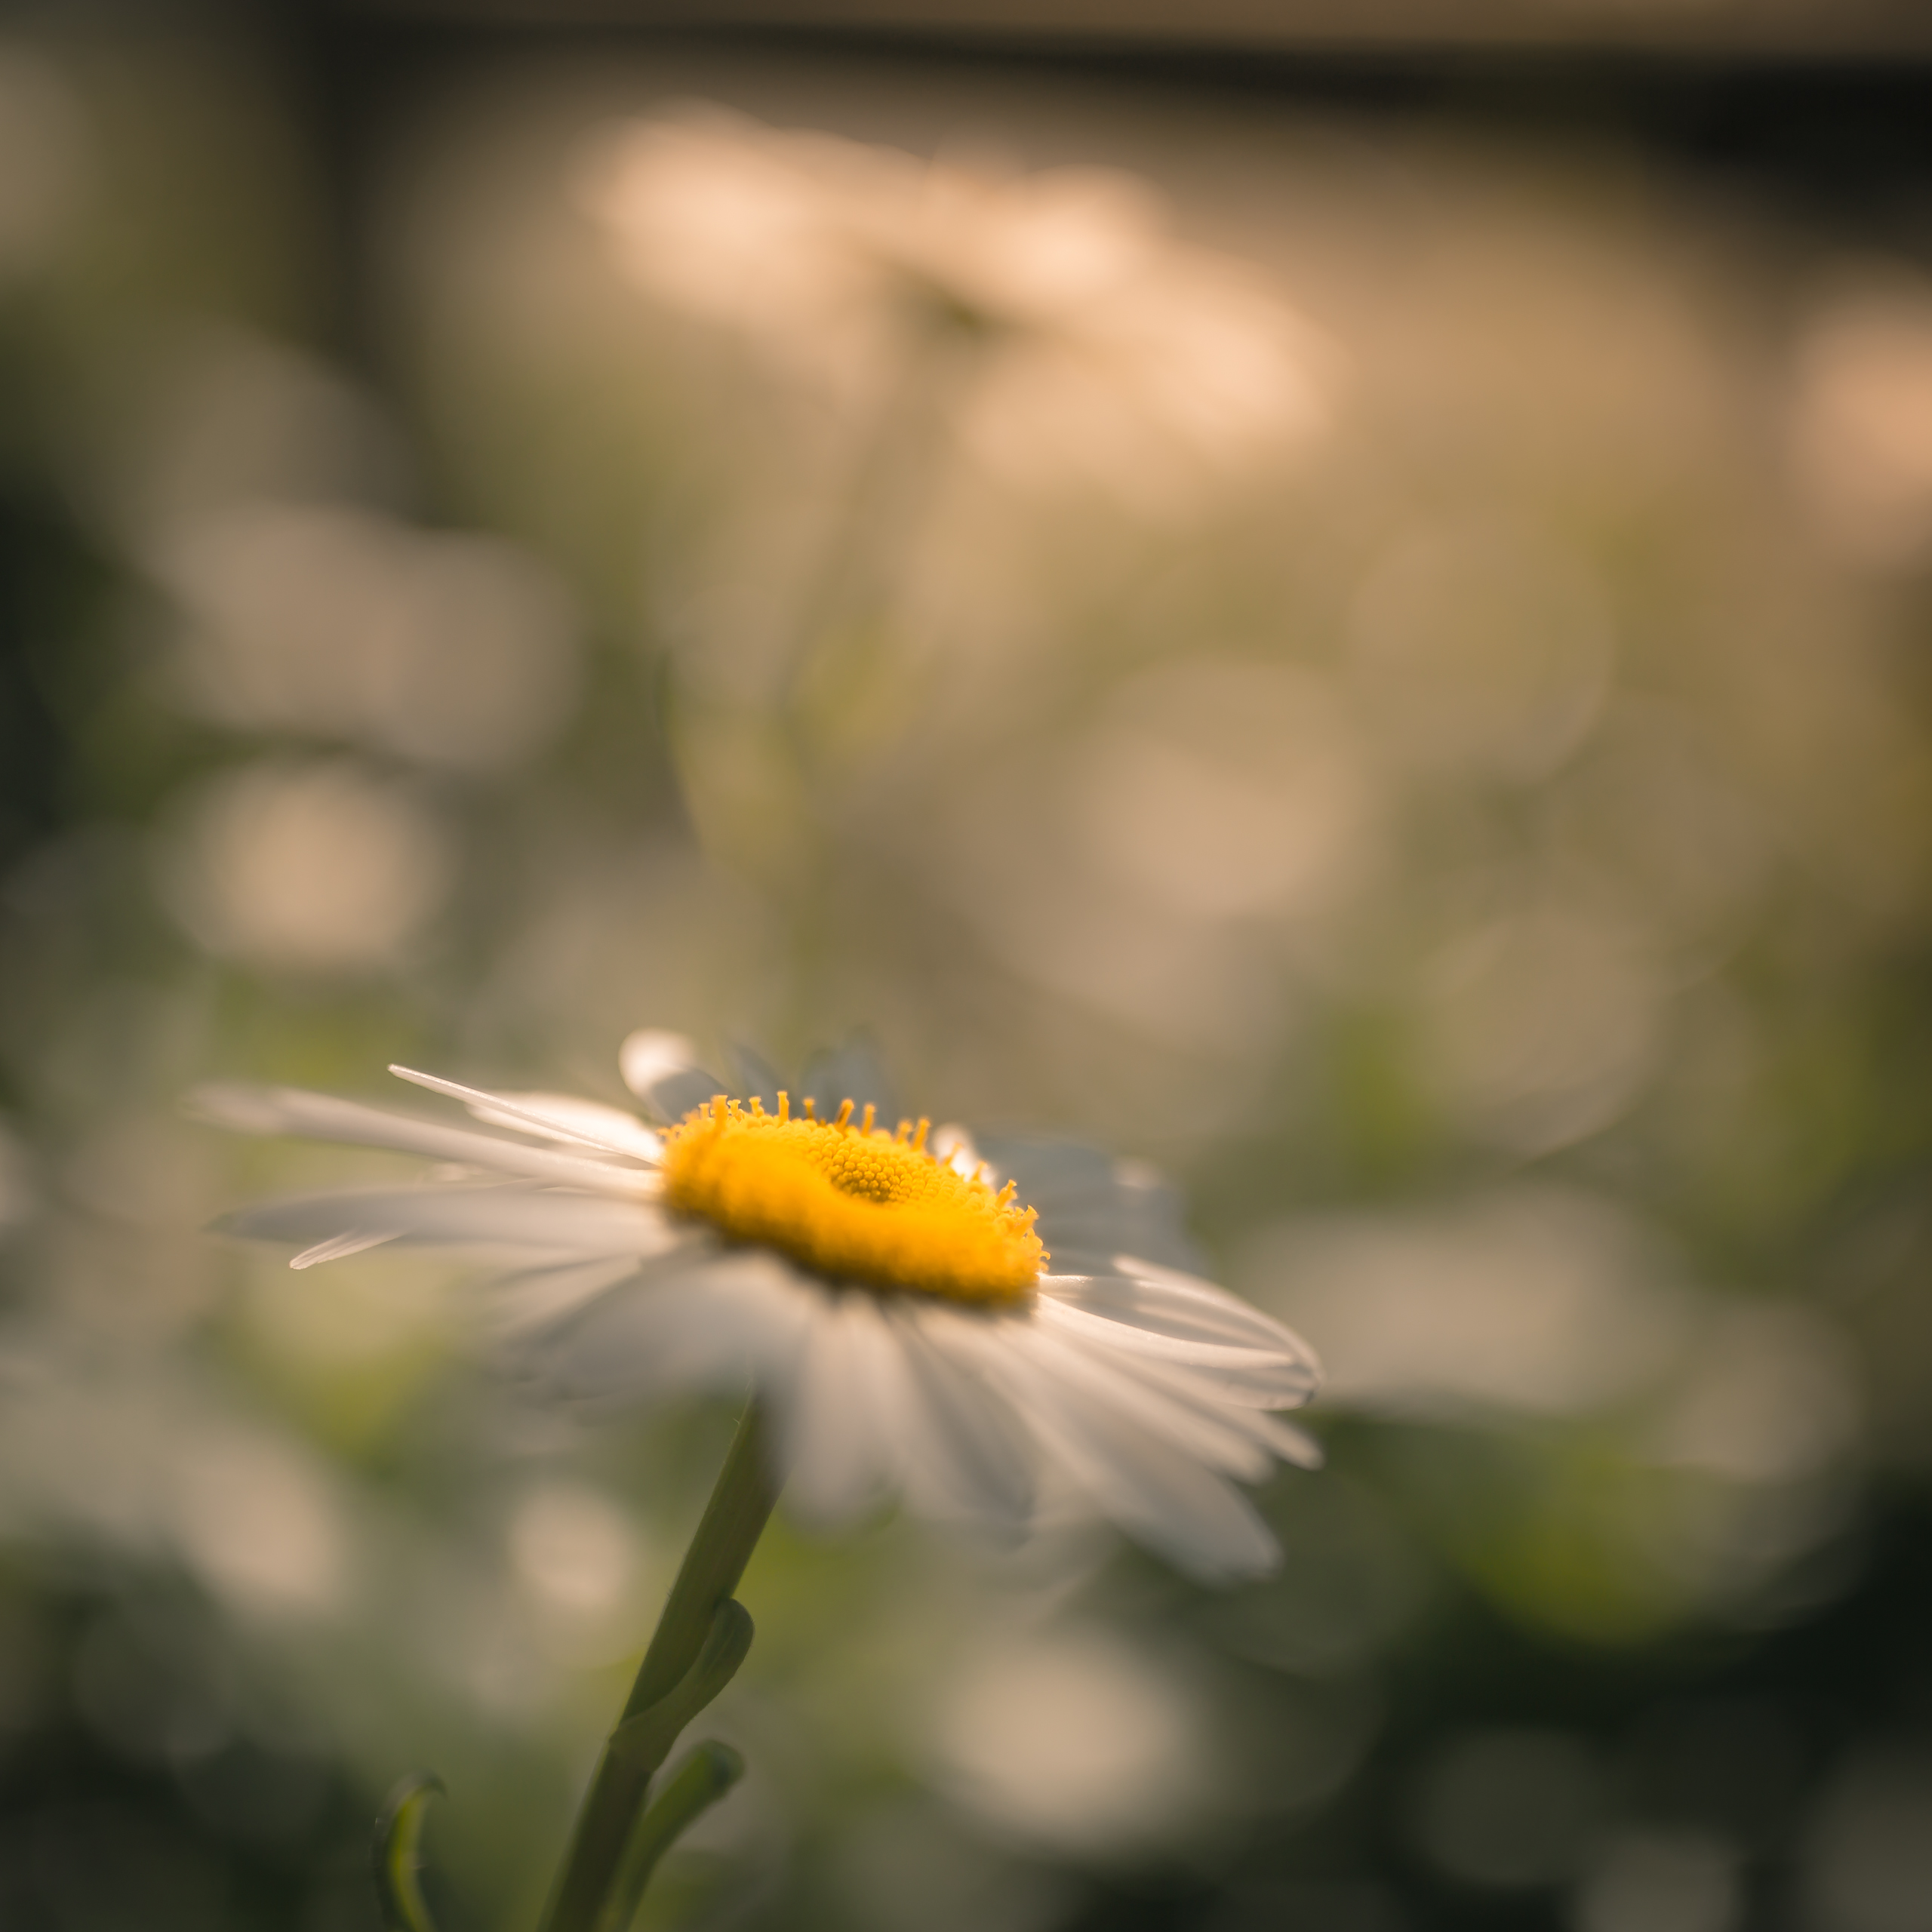 Square format photograph of a sunlit daisy blossom backed by smooth bokeh and soft focus.